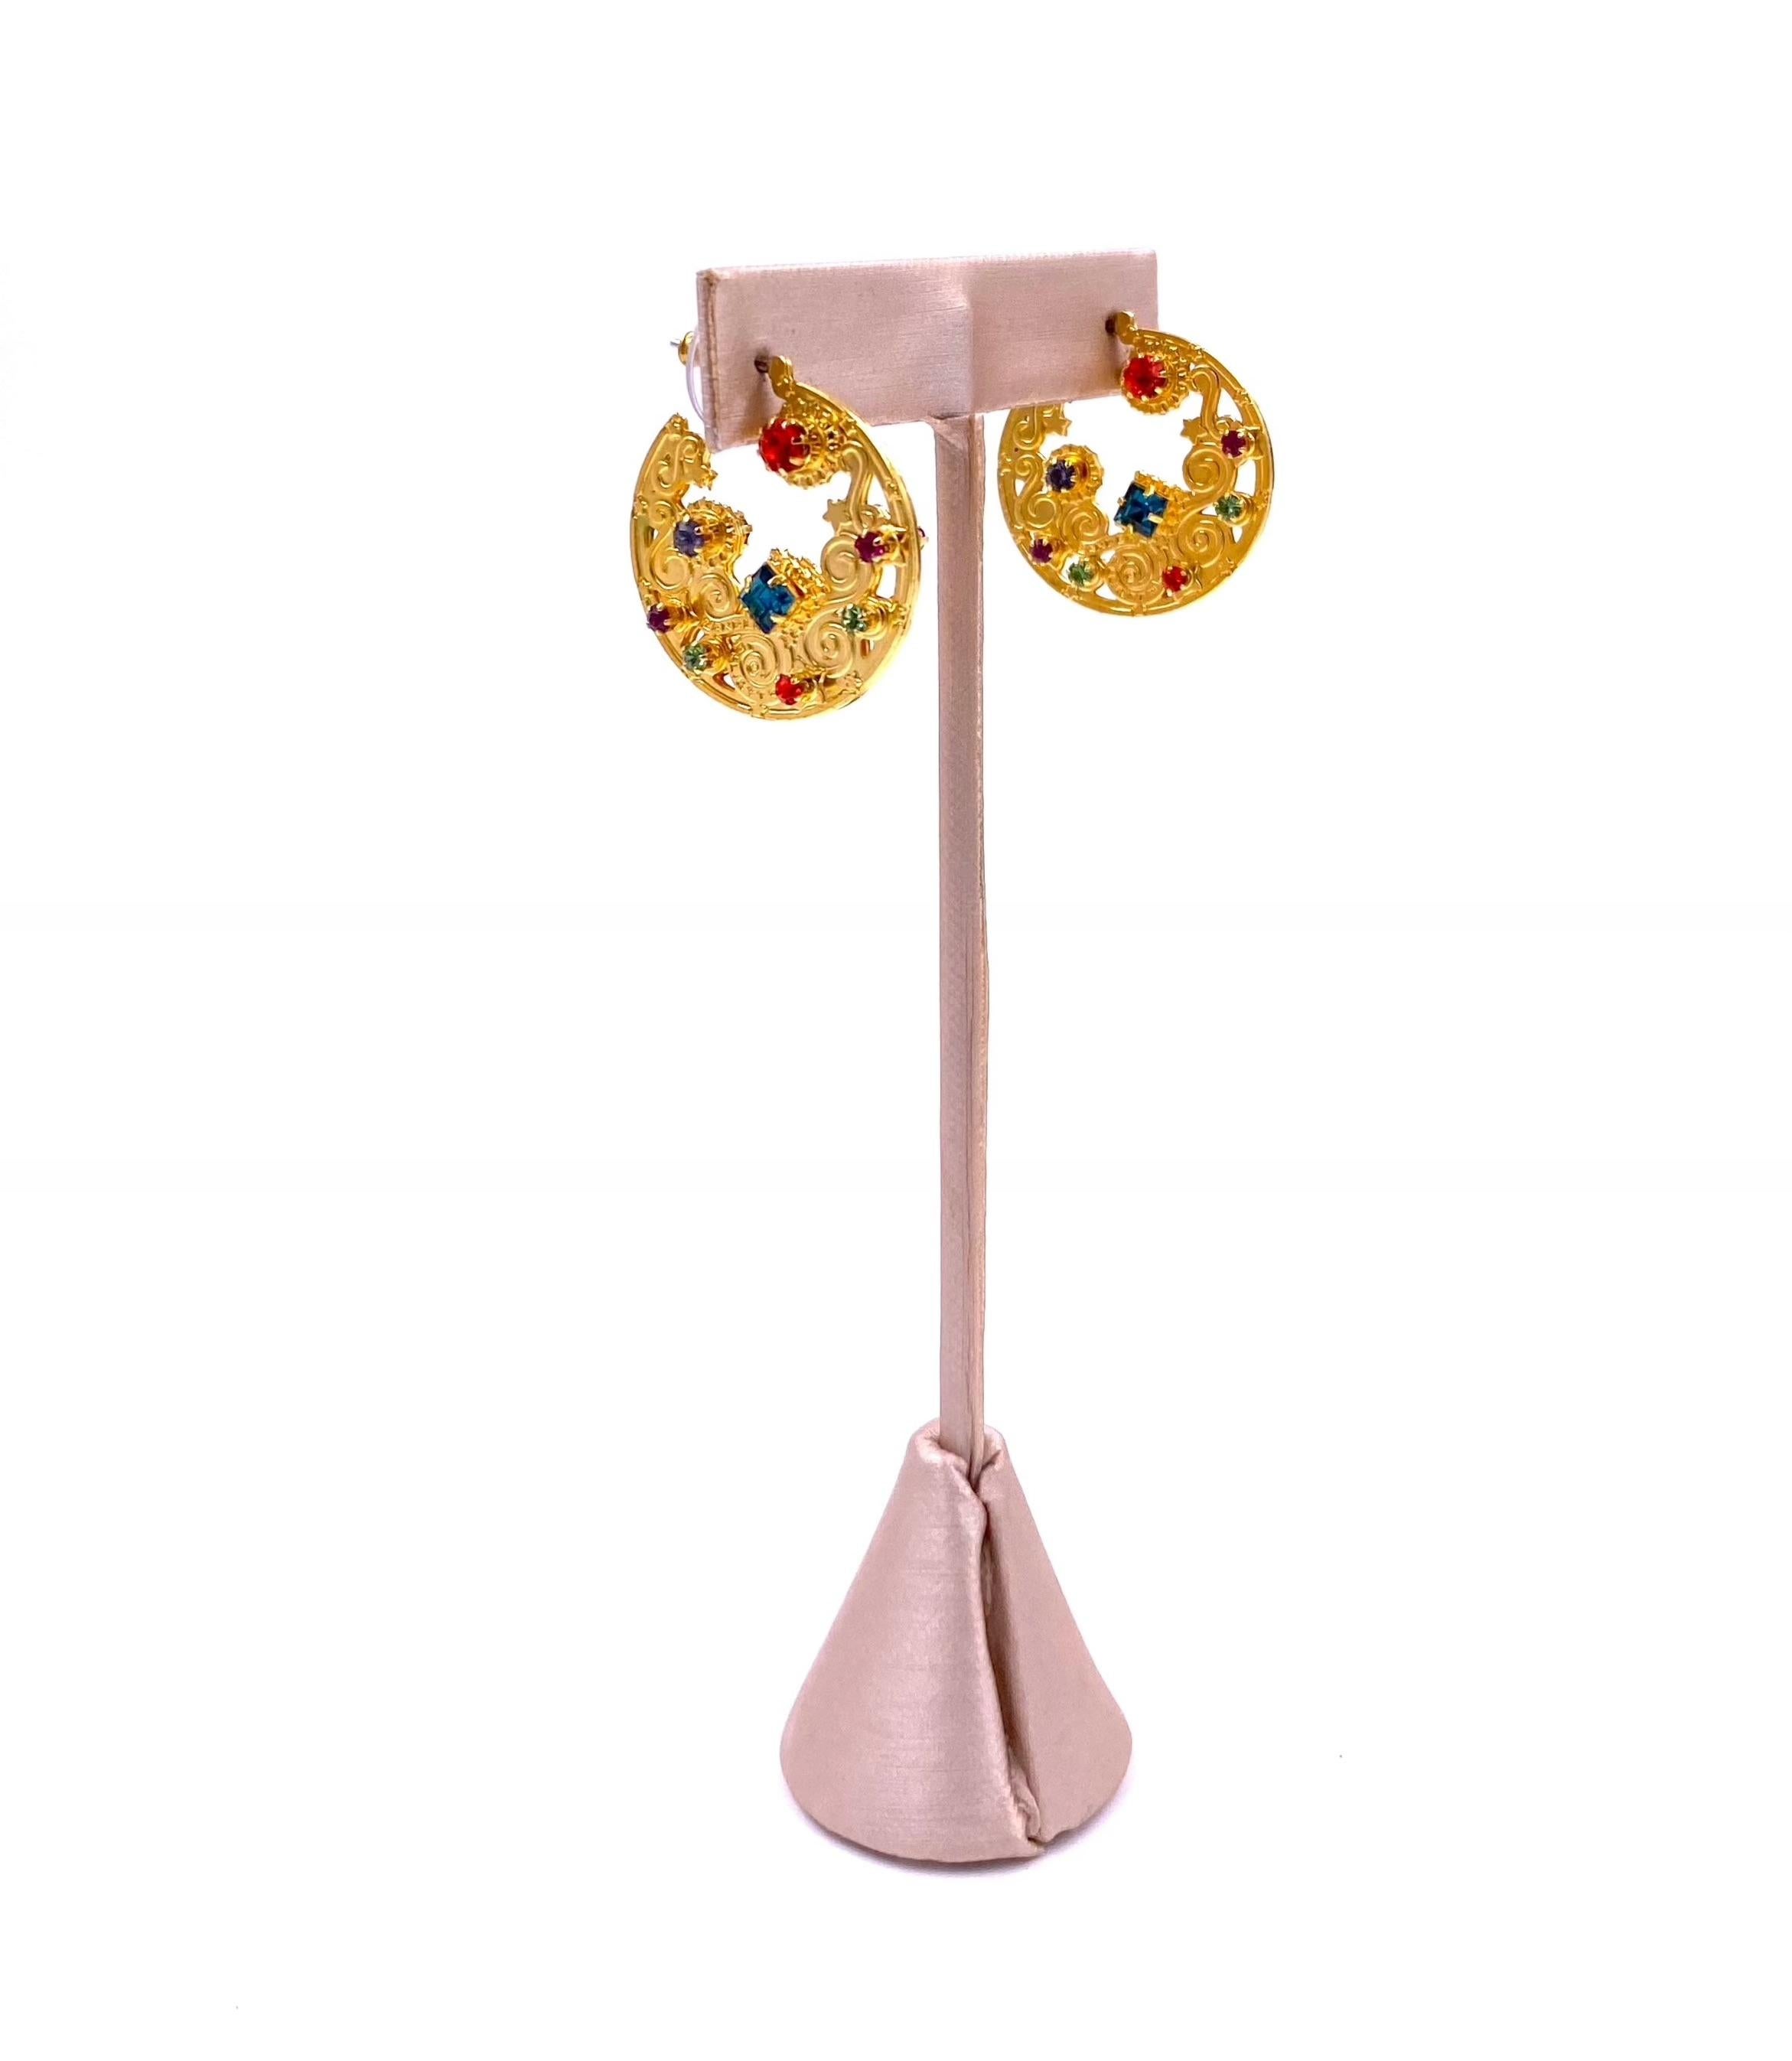 Add some dazzle to your outfits with Lunch at the Ritz Earrings in bright, multi-colored rhinestones. These unique gold moon-shaped earrings are sure to make a statement wherever you go. Shine bright like the moon (but with a little more sparkle)